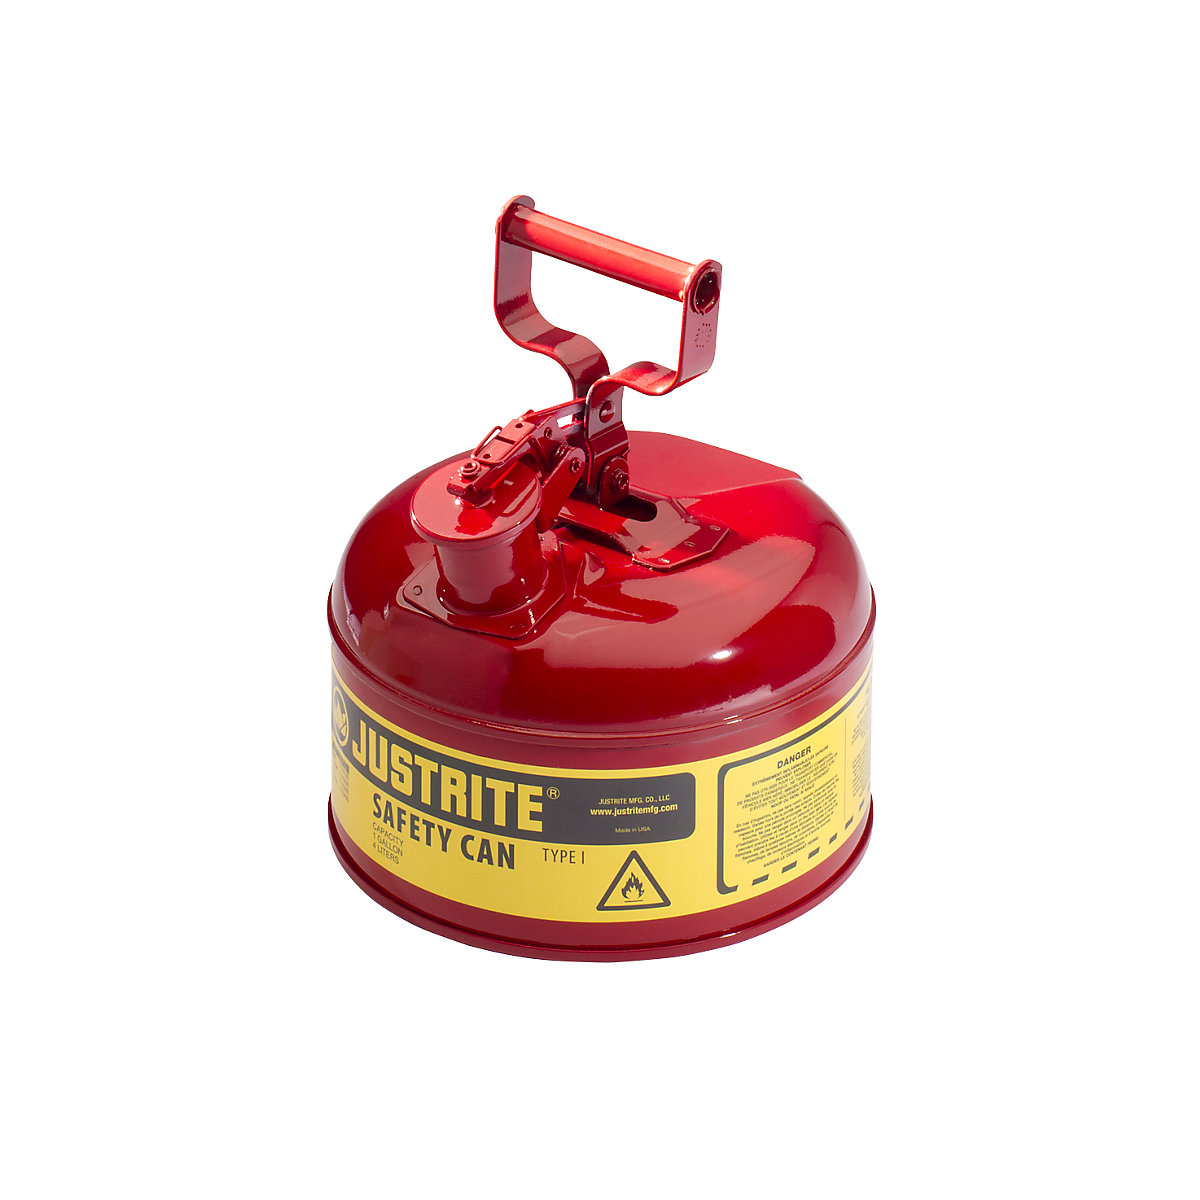 Steel safety container - Justrite